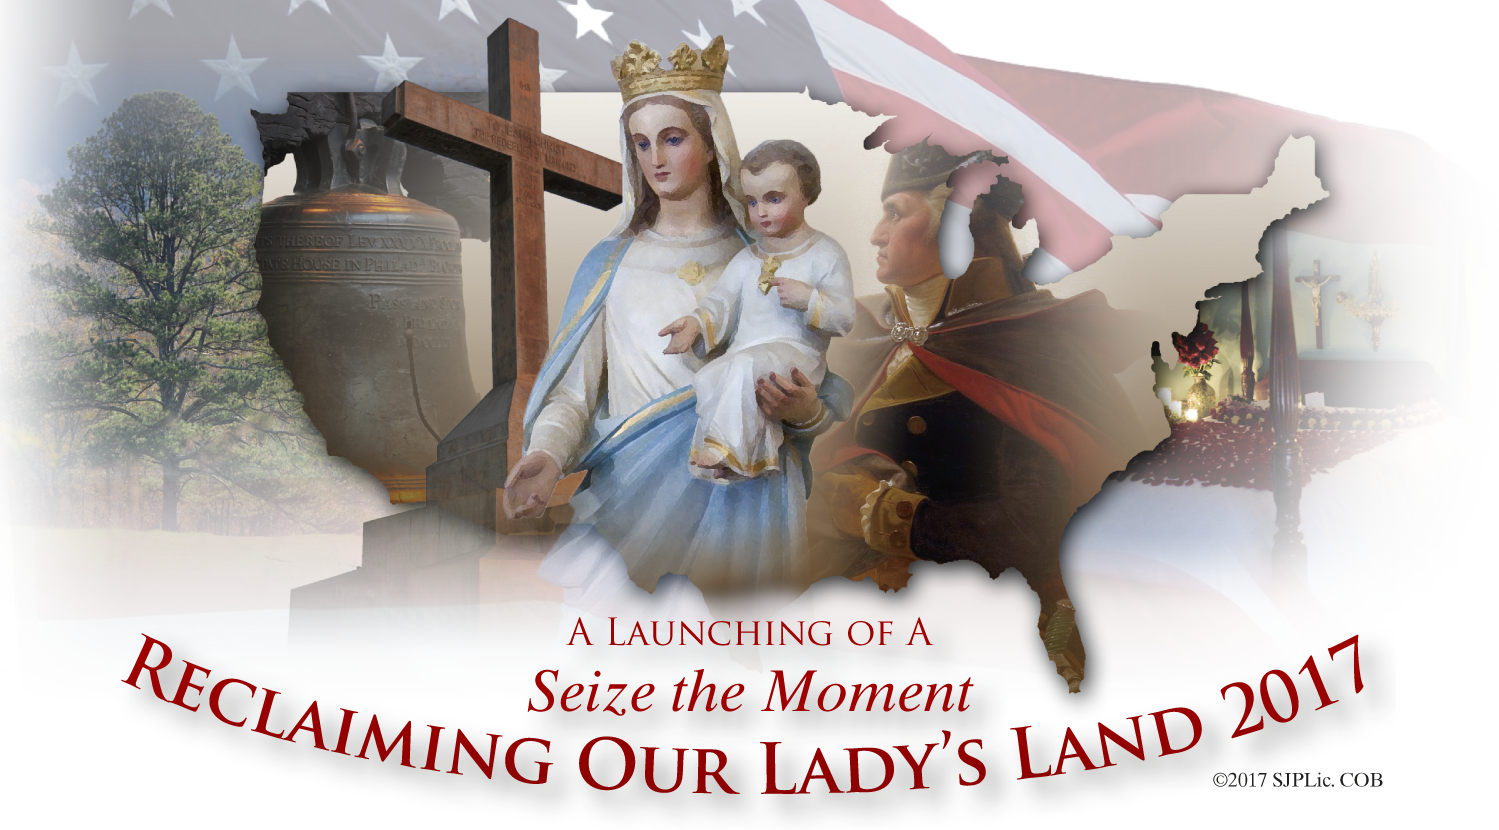 Reclaiming Our Lady's Land